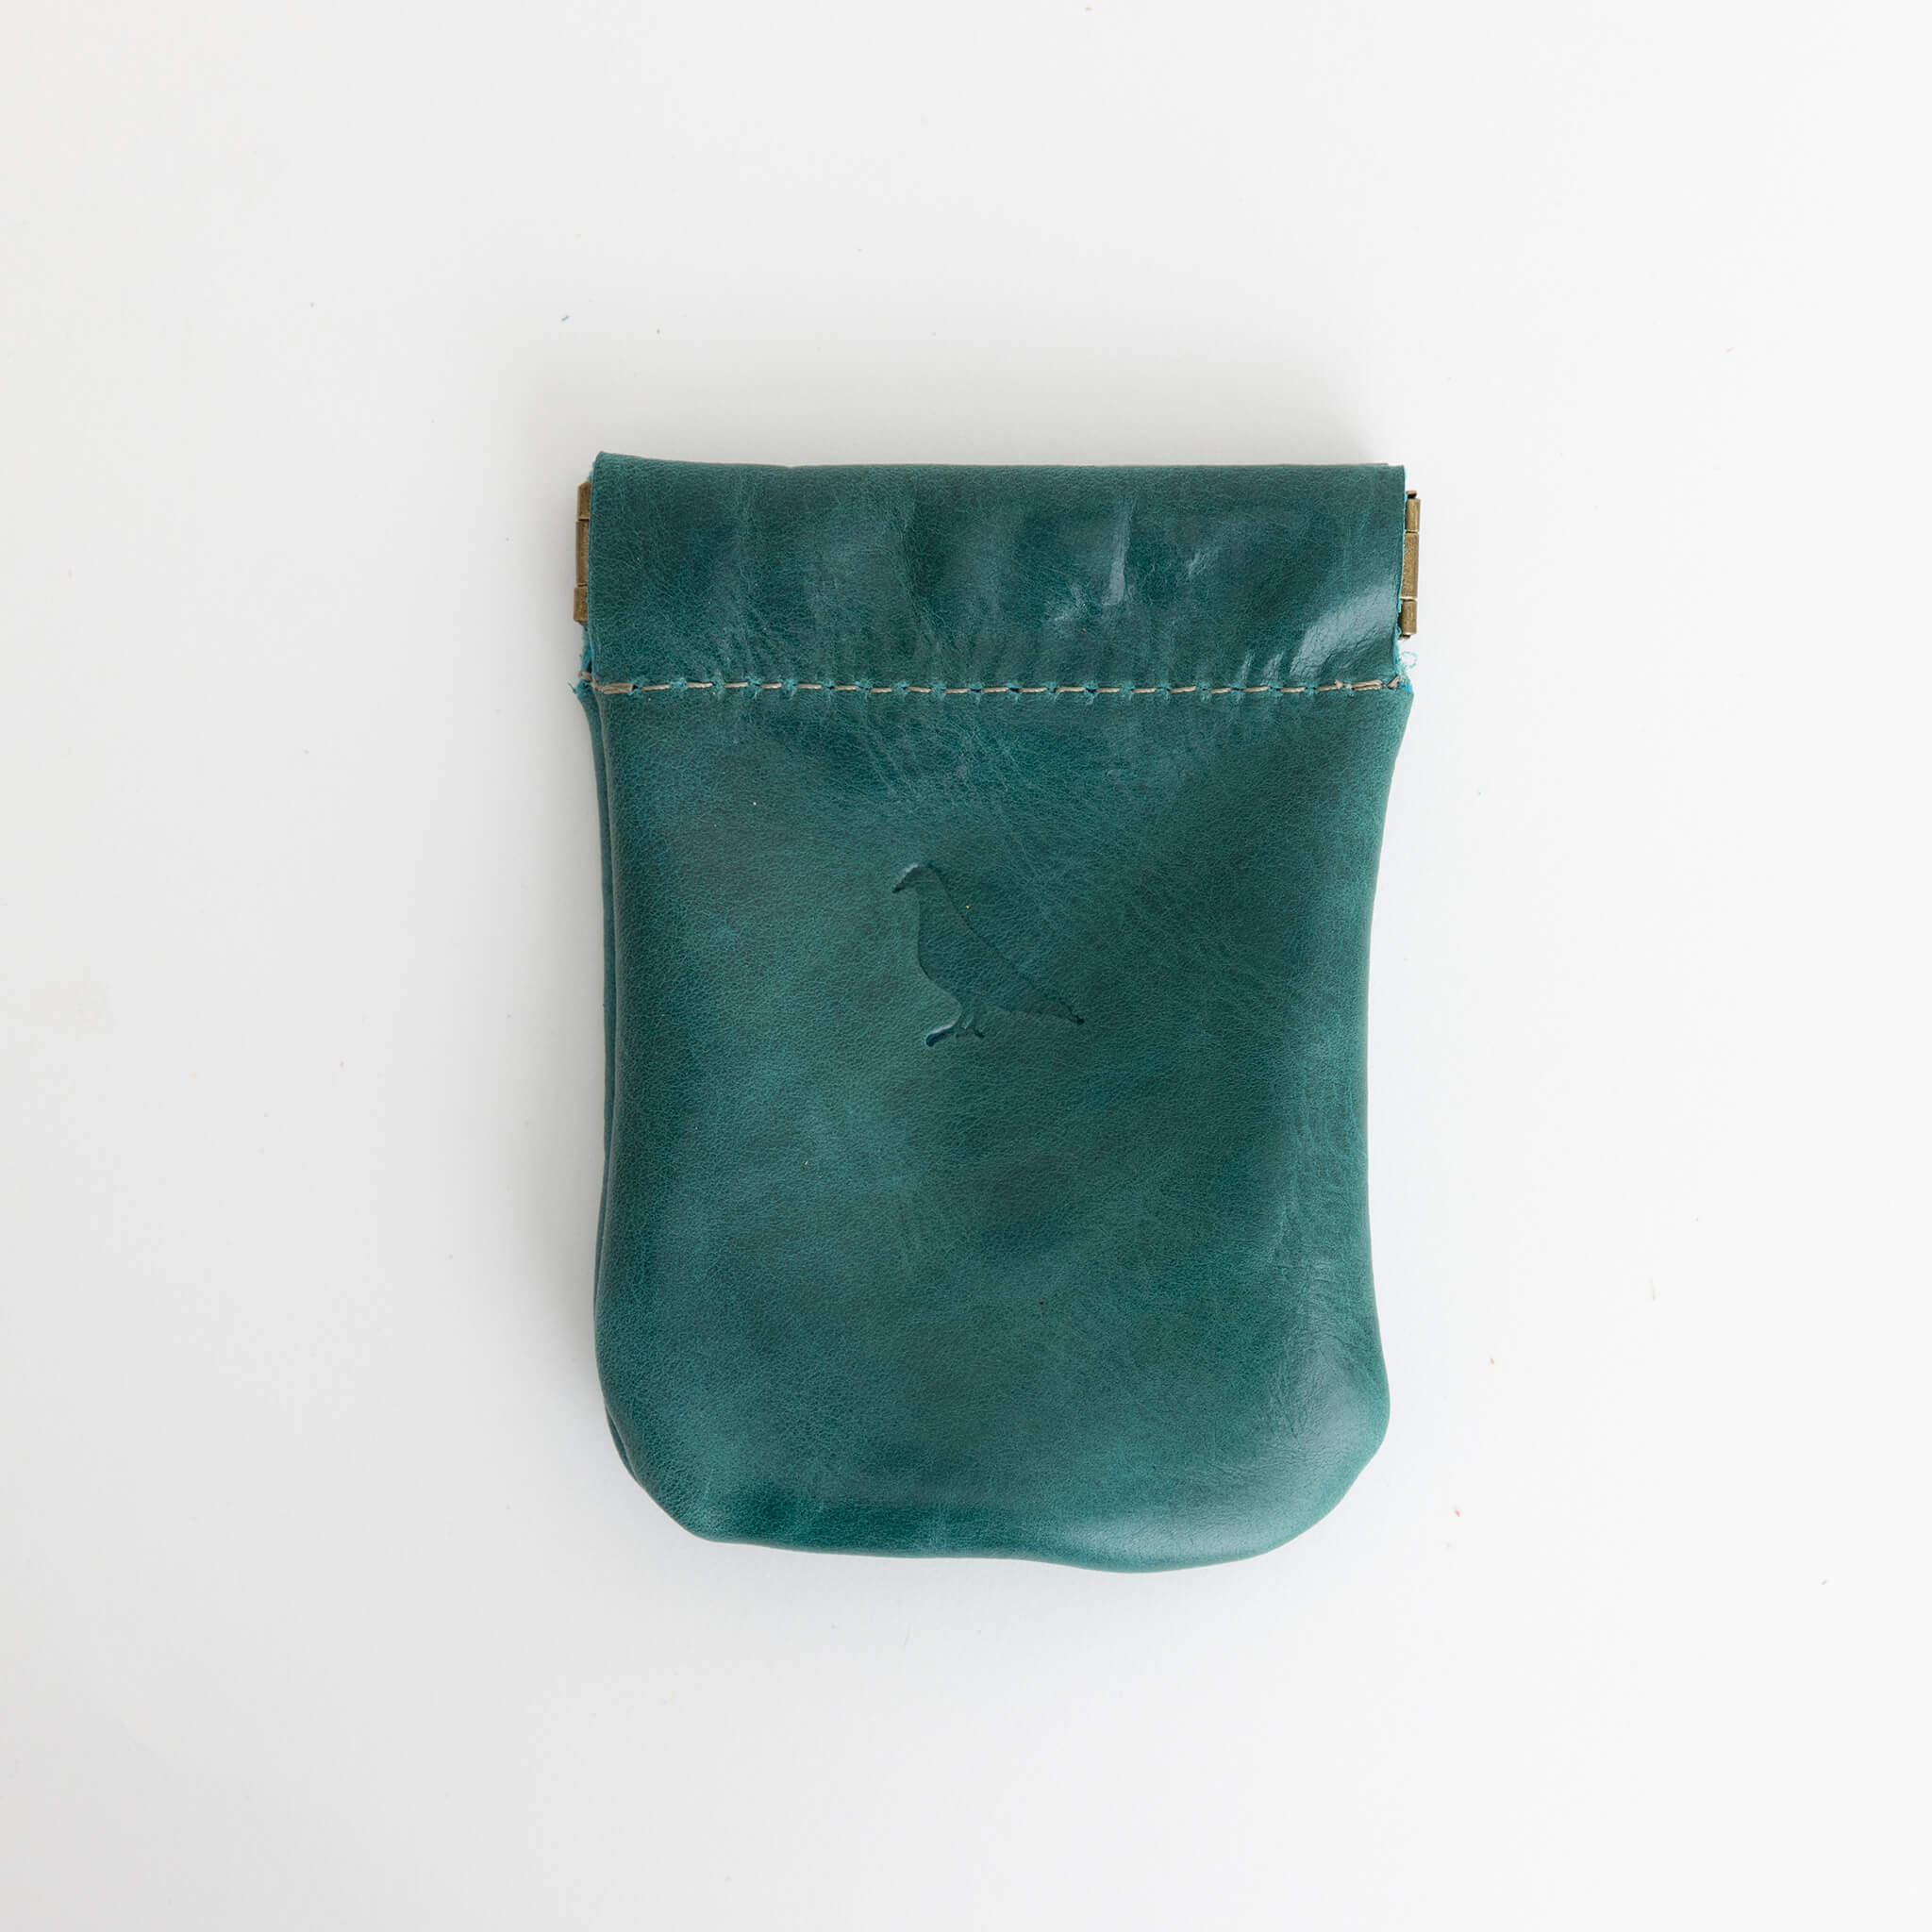 pilu pouch unisex kiss-close pouch - handmade leather - ocean front view